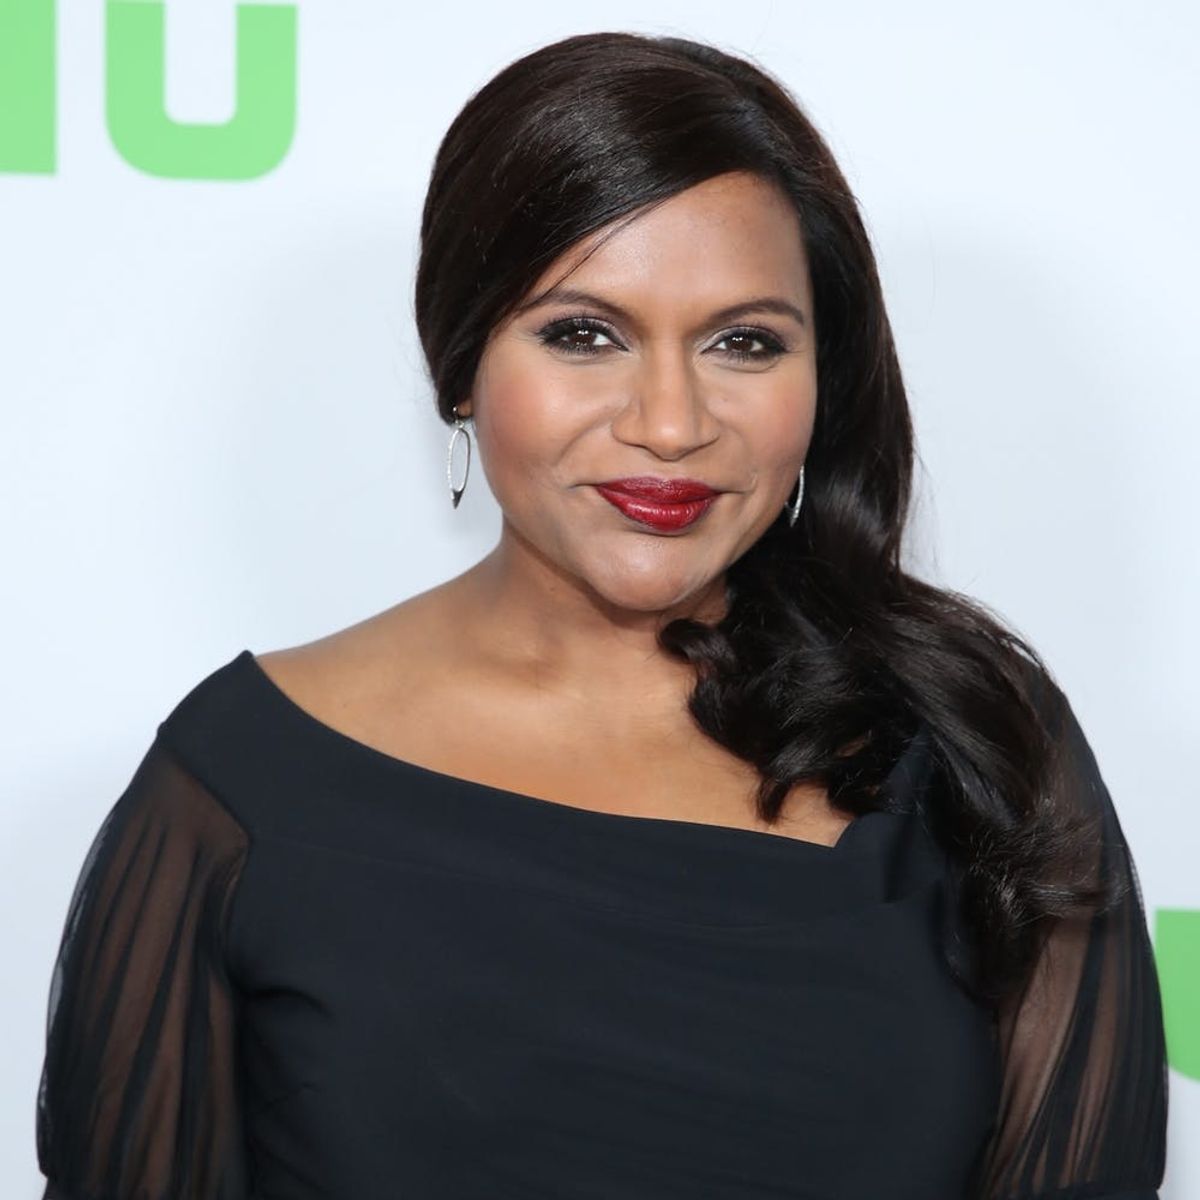 Mindy Kaling Admits She’s “So Anxious” About Becoming a Mom